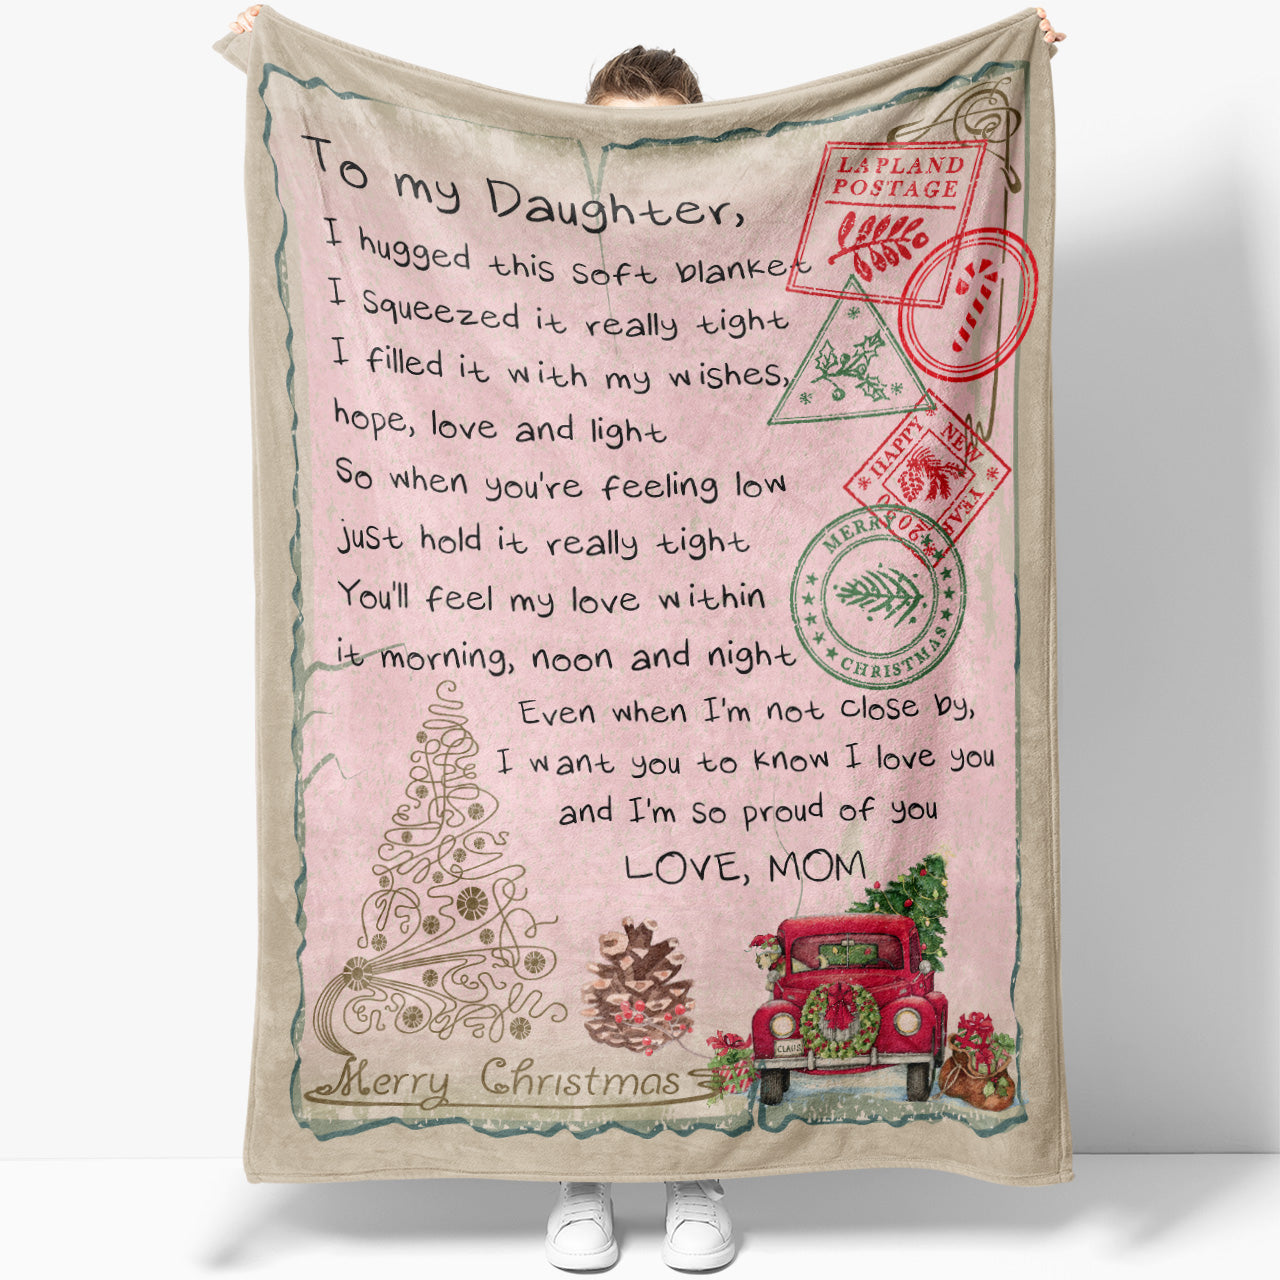 Blanket Gifts For Adult Daughter, Sentimental Gifts For Daughter From Mom,  I Hugged This, Christmas Gifts For Daughter, Unique Mother Daughter Gifts -  Sweet Family Gift